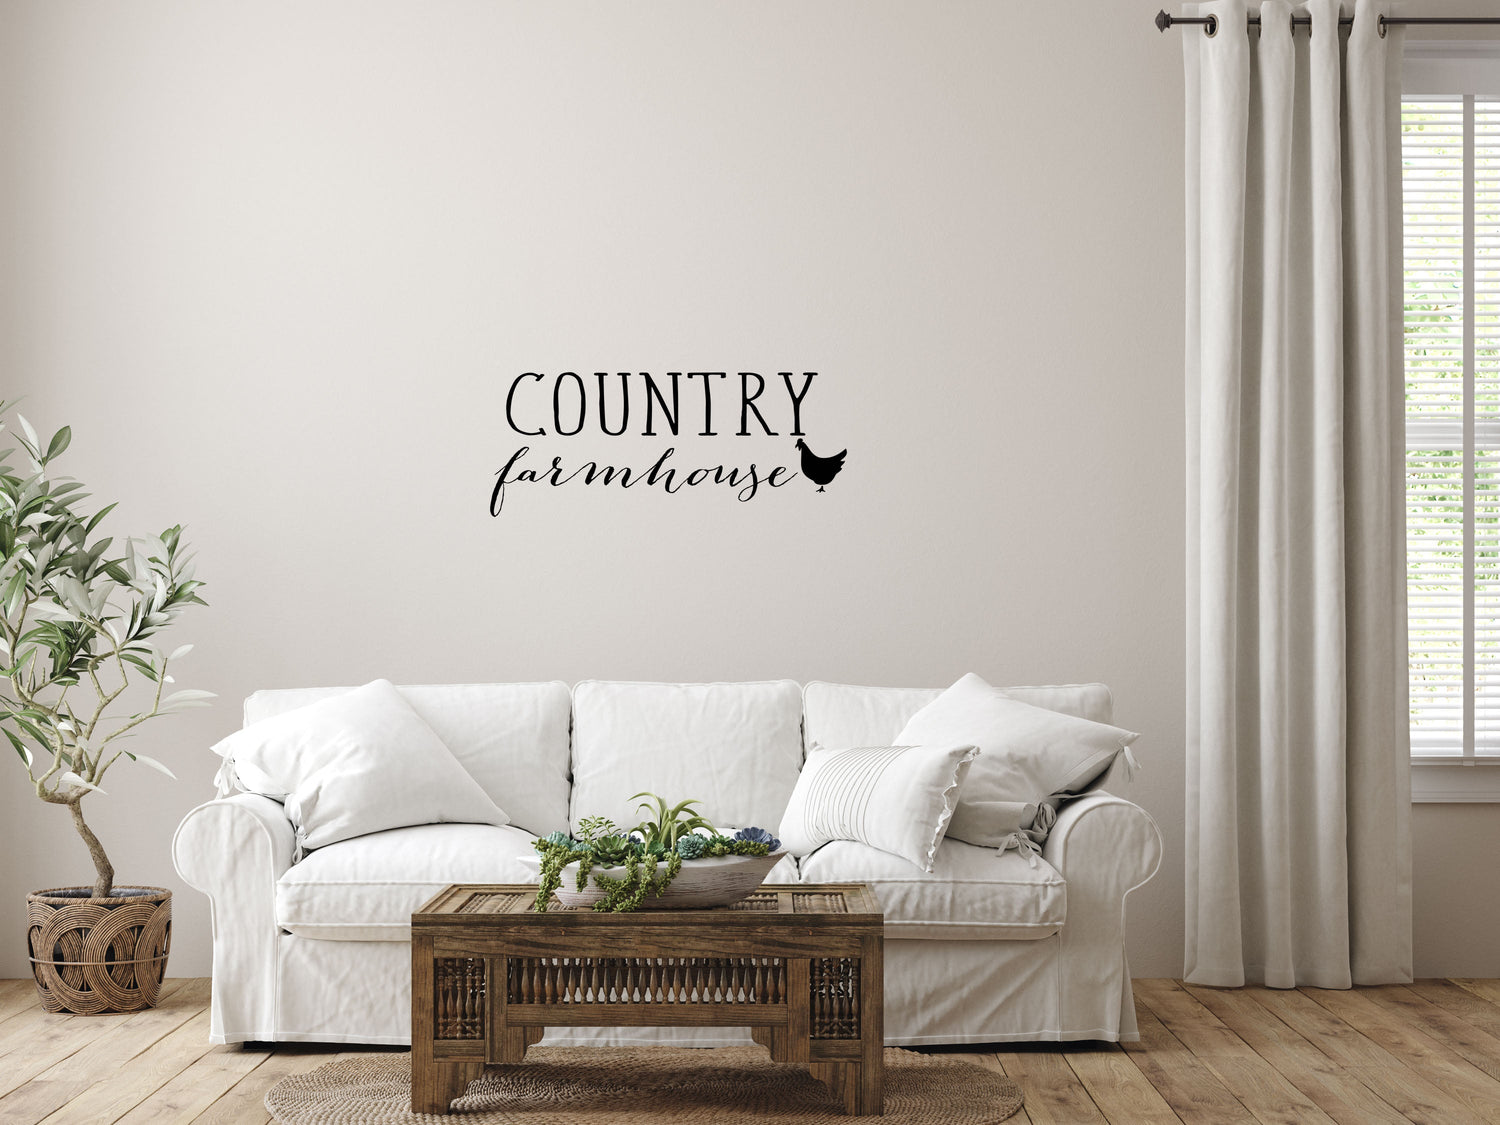 Country Farmhouse Wall Decal - Farmhouse Decal - Country Farm Wall Art - Chicken Wall Decal - Farmhouse Wall Decor Inspirational Wall Signs 